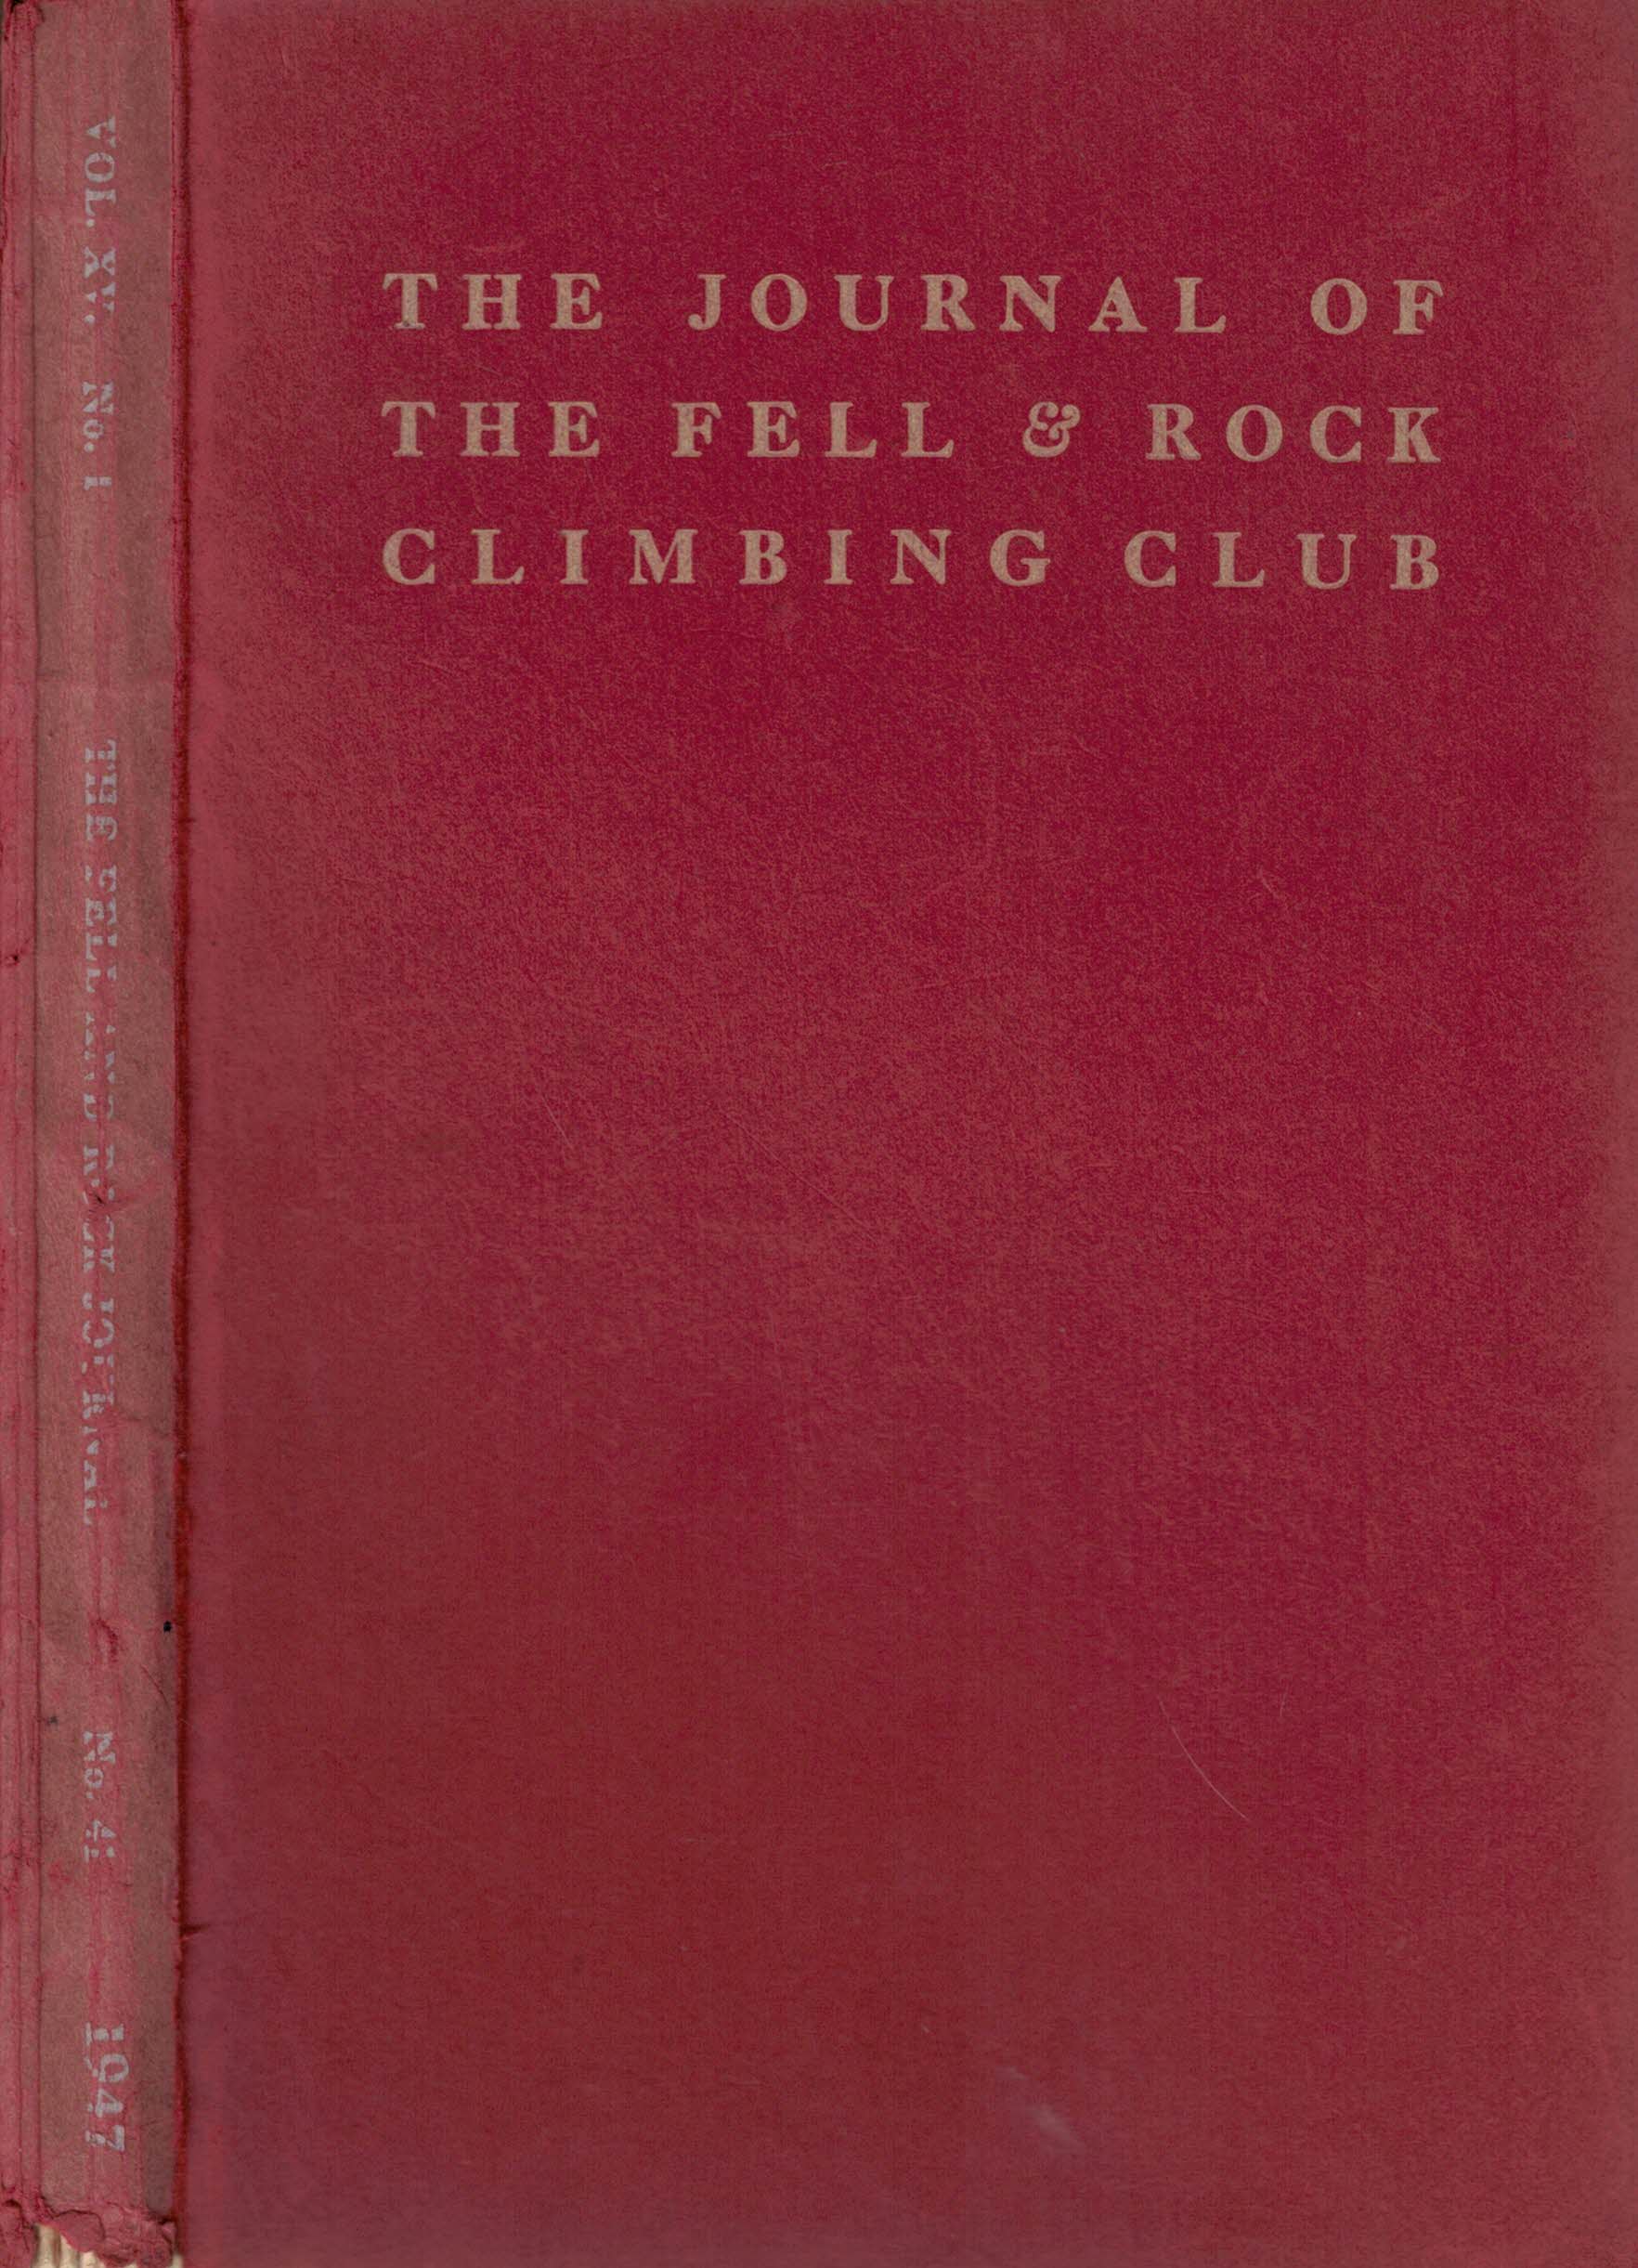 The Journal of the Fell & Rock Climbing Club of the English Lake District. No 41. (Volume 15 No I) 1947.